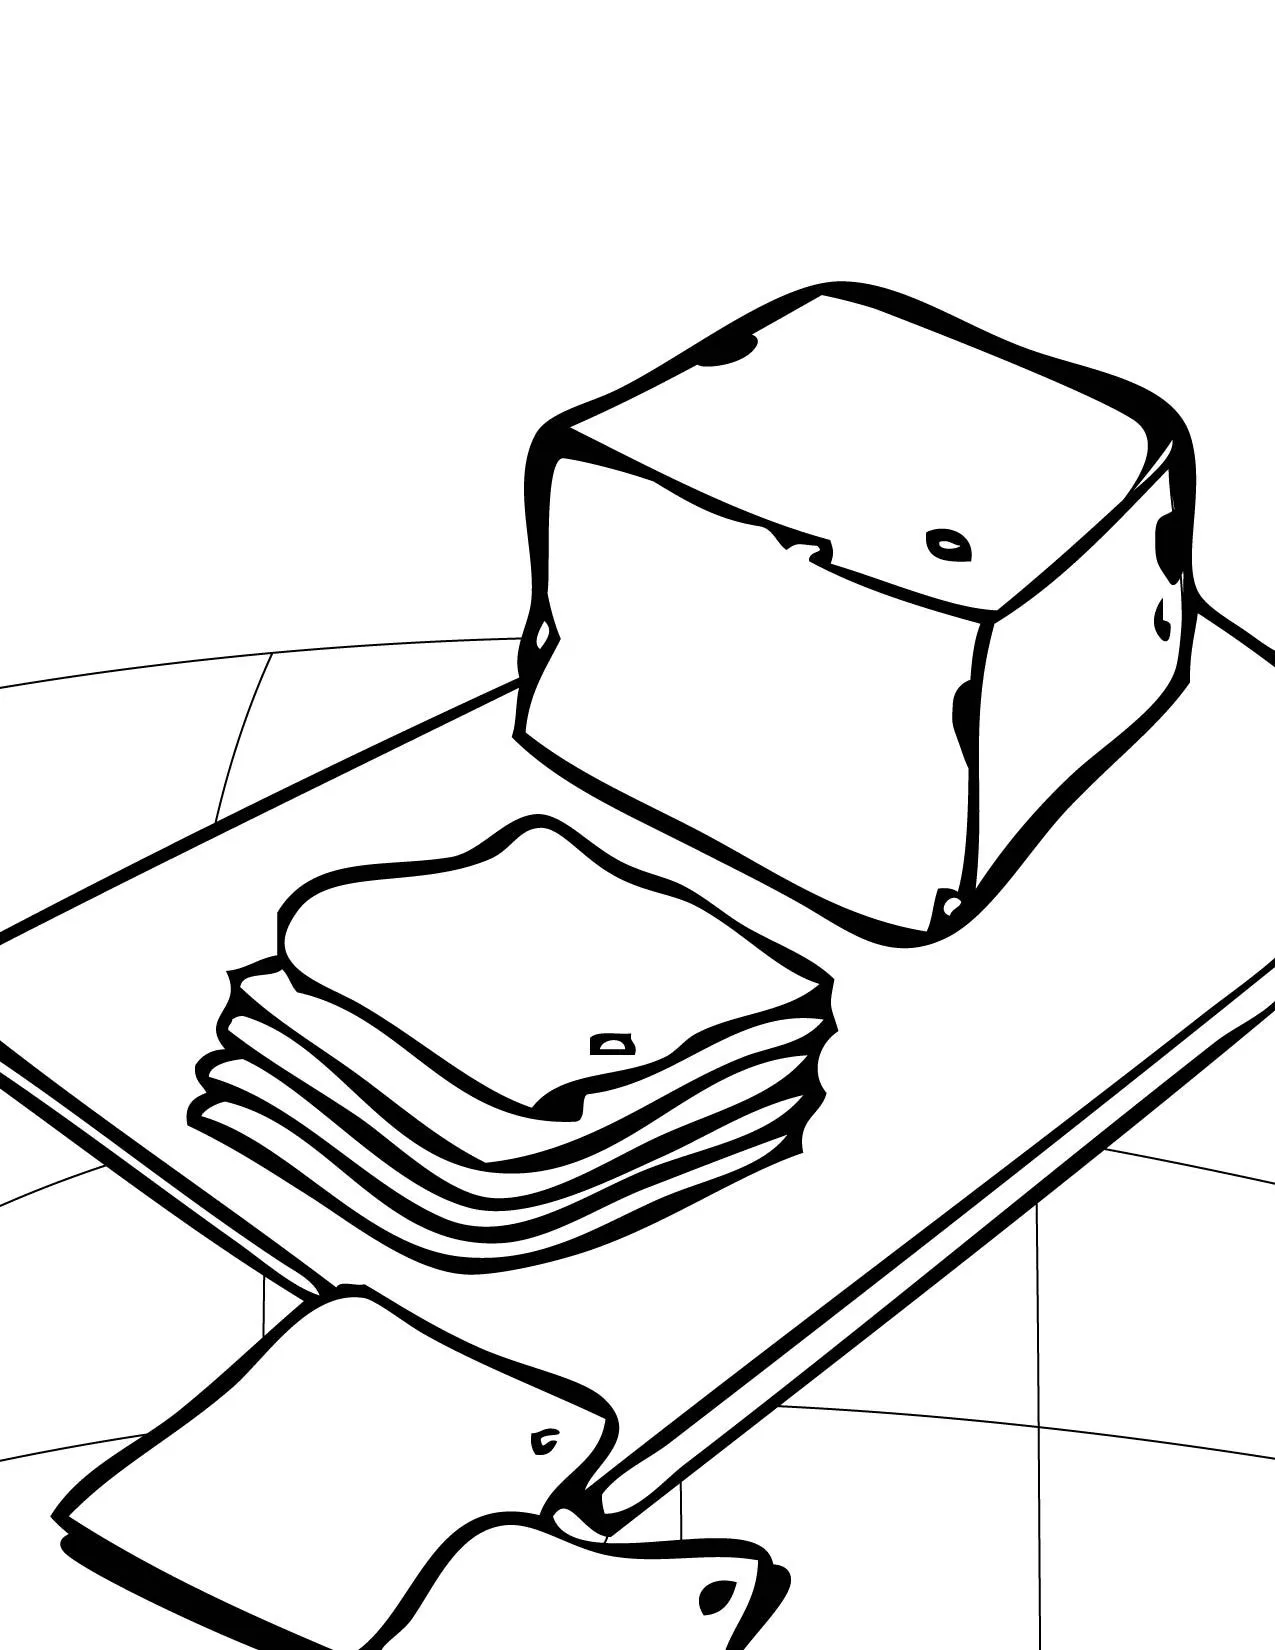 Grilled Cheese Coloring Pages Crokky Coloring Pages